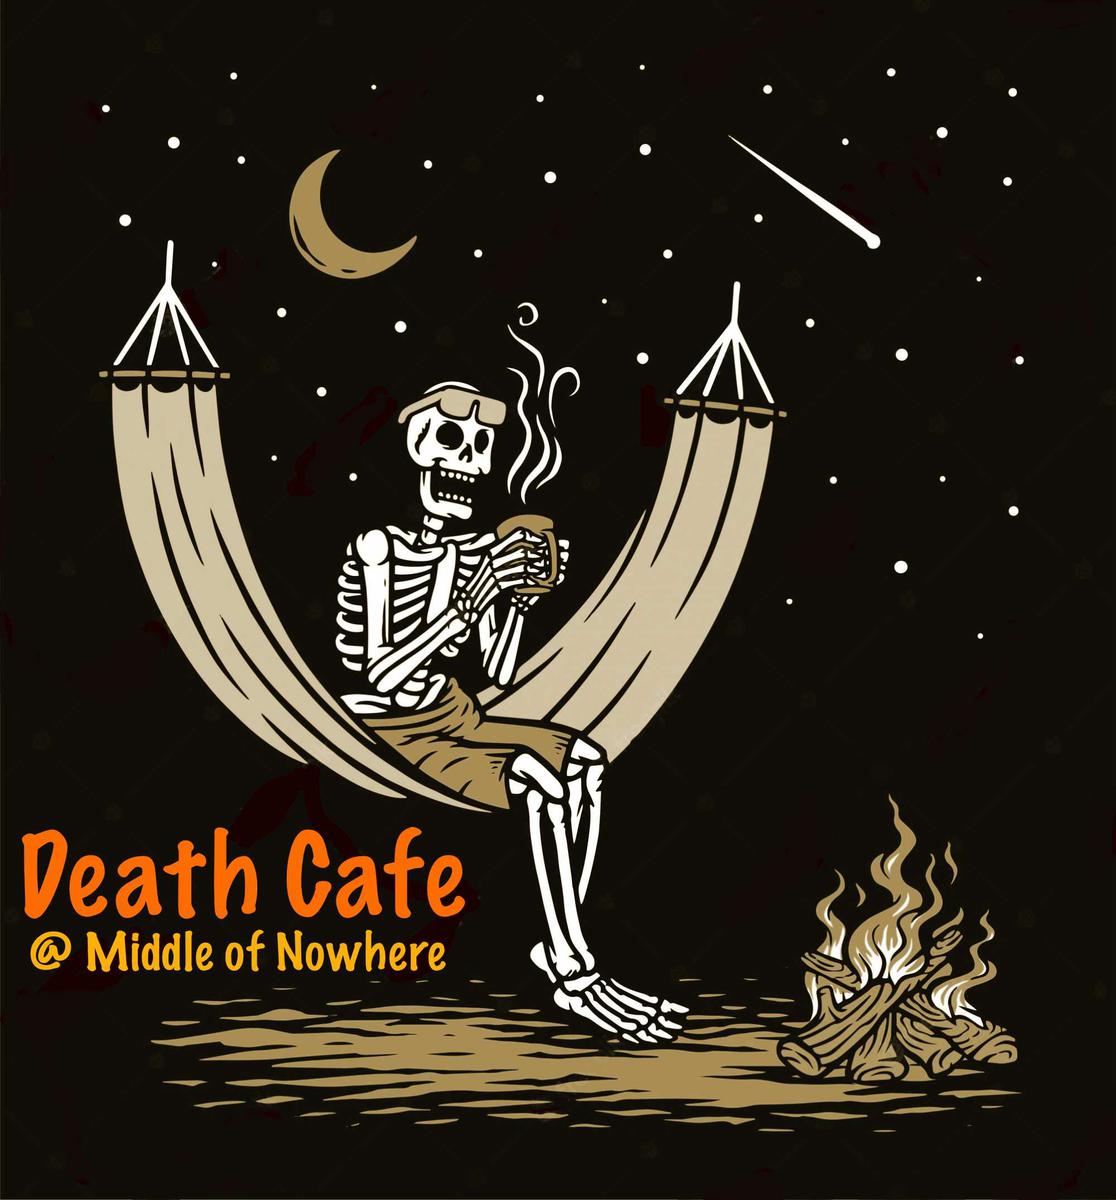 Monegros Death Cafe @ Middle of Nowhere